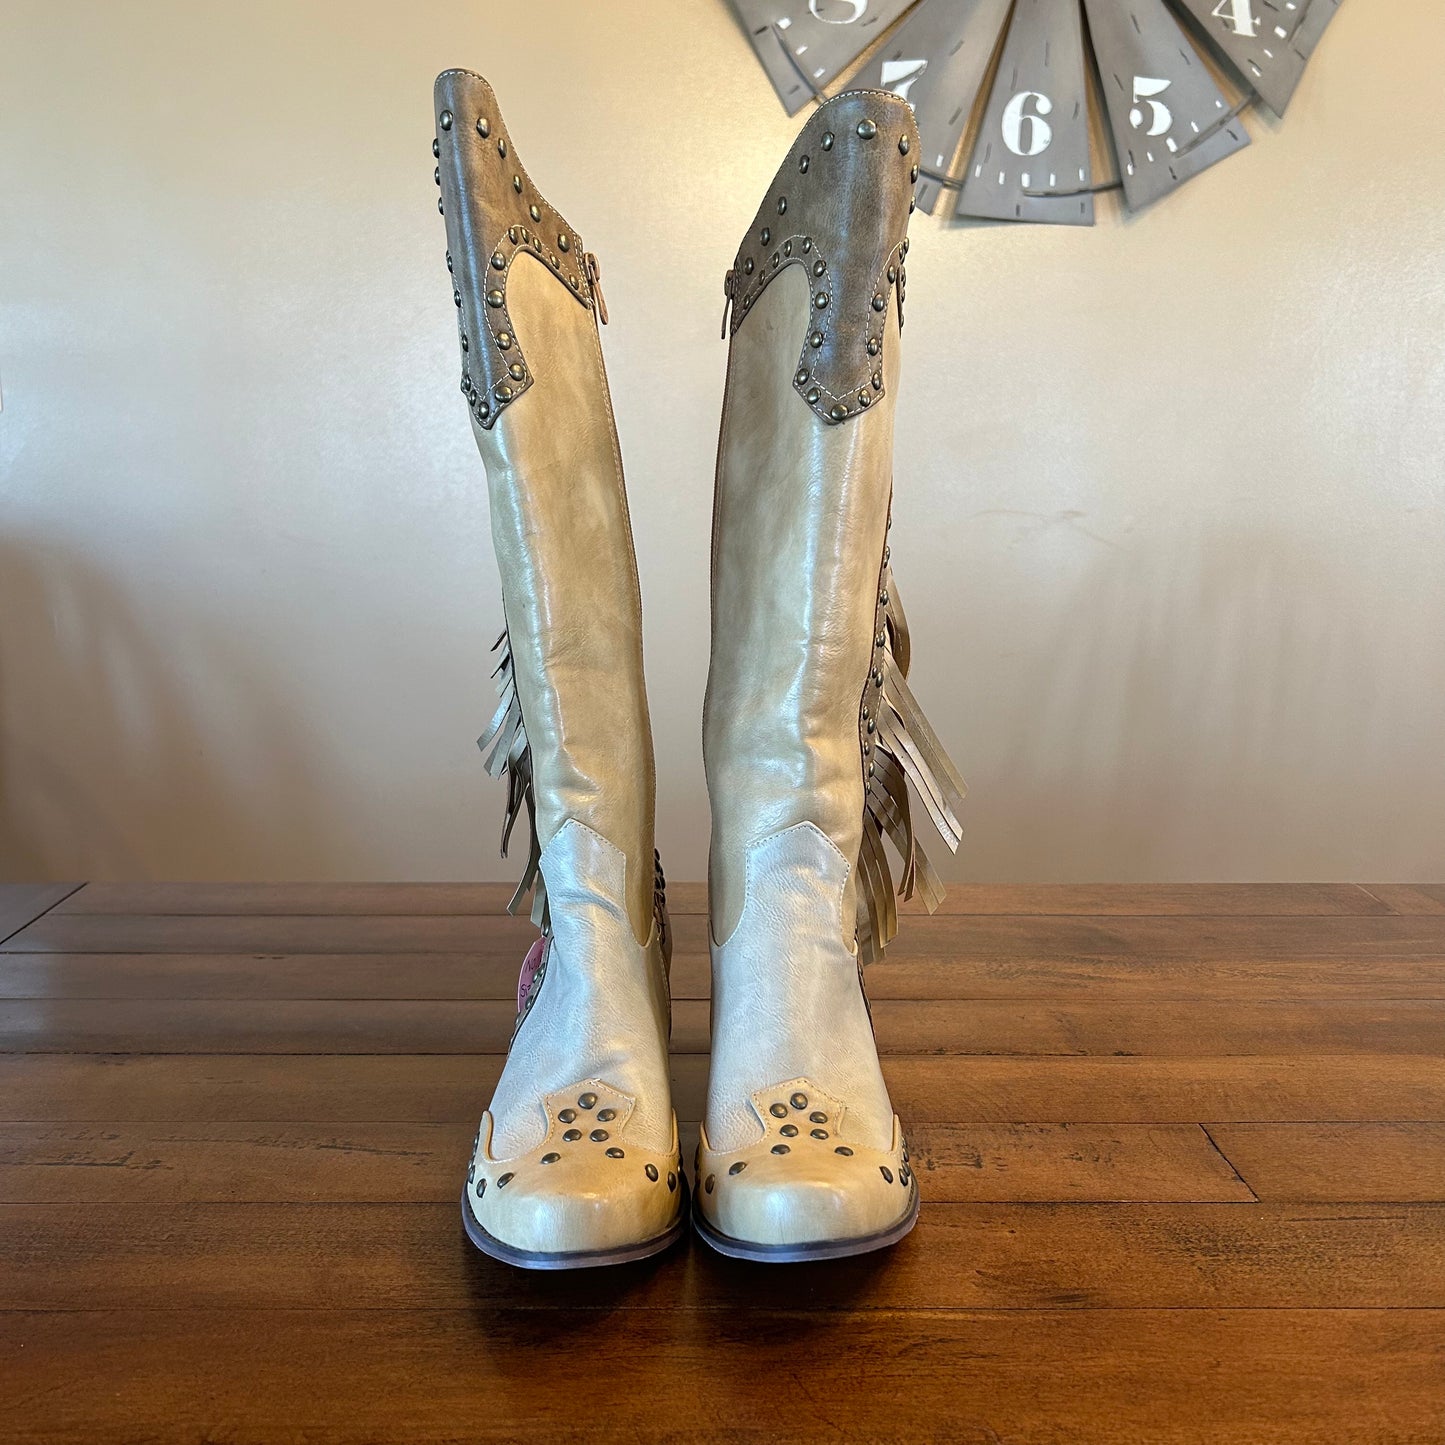 Tan Studded Boots with Fringe Size 9.5